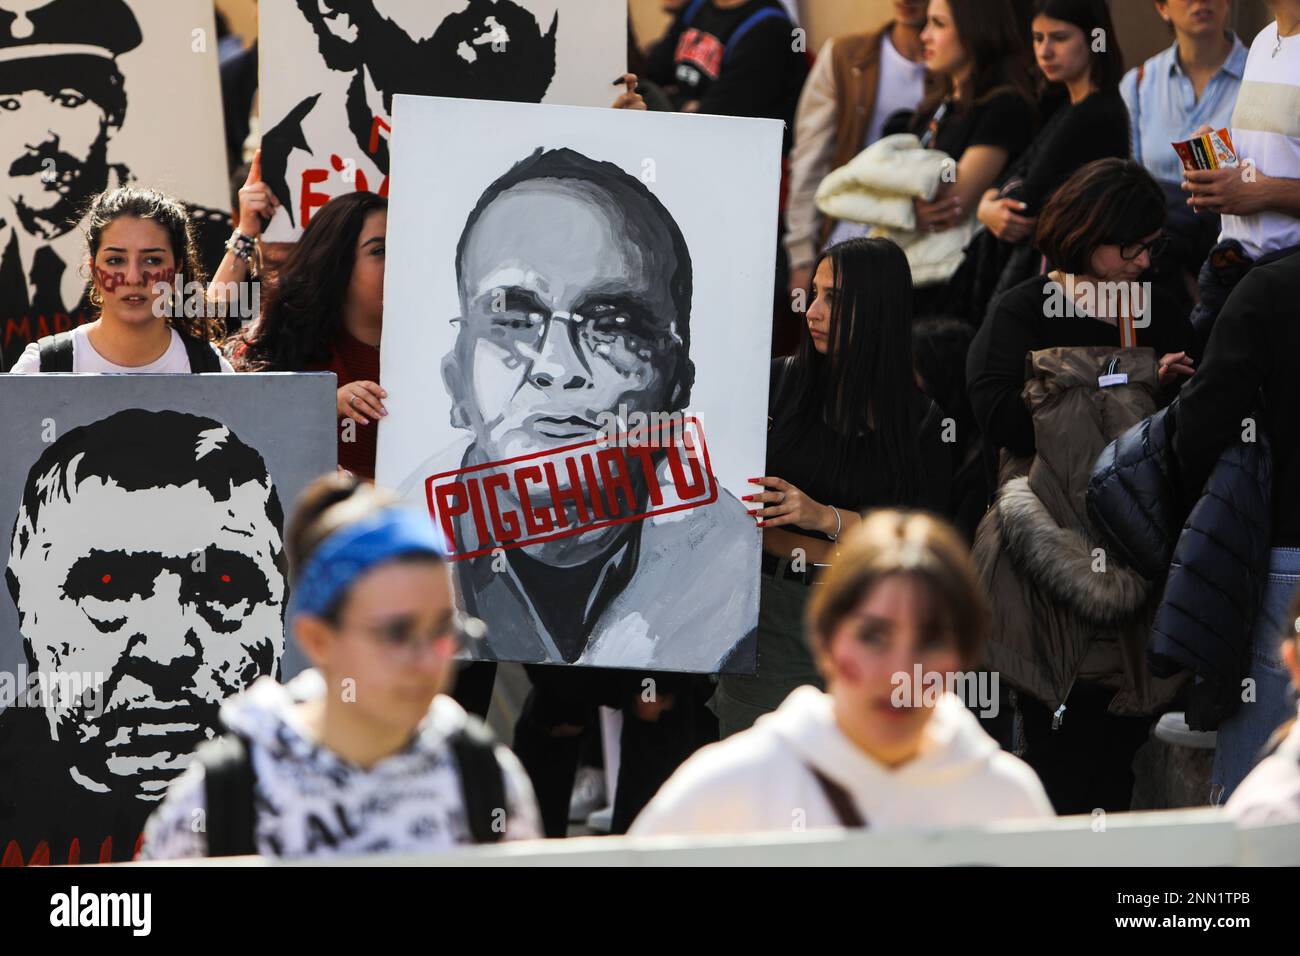 Students demonstrate against the mafia during the Bagheria-Casteldaccia march. Stock Photo